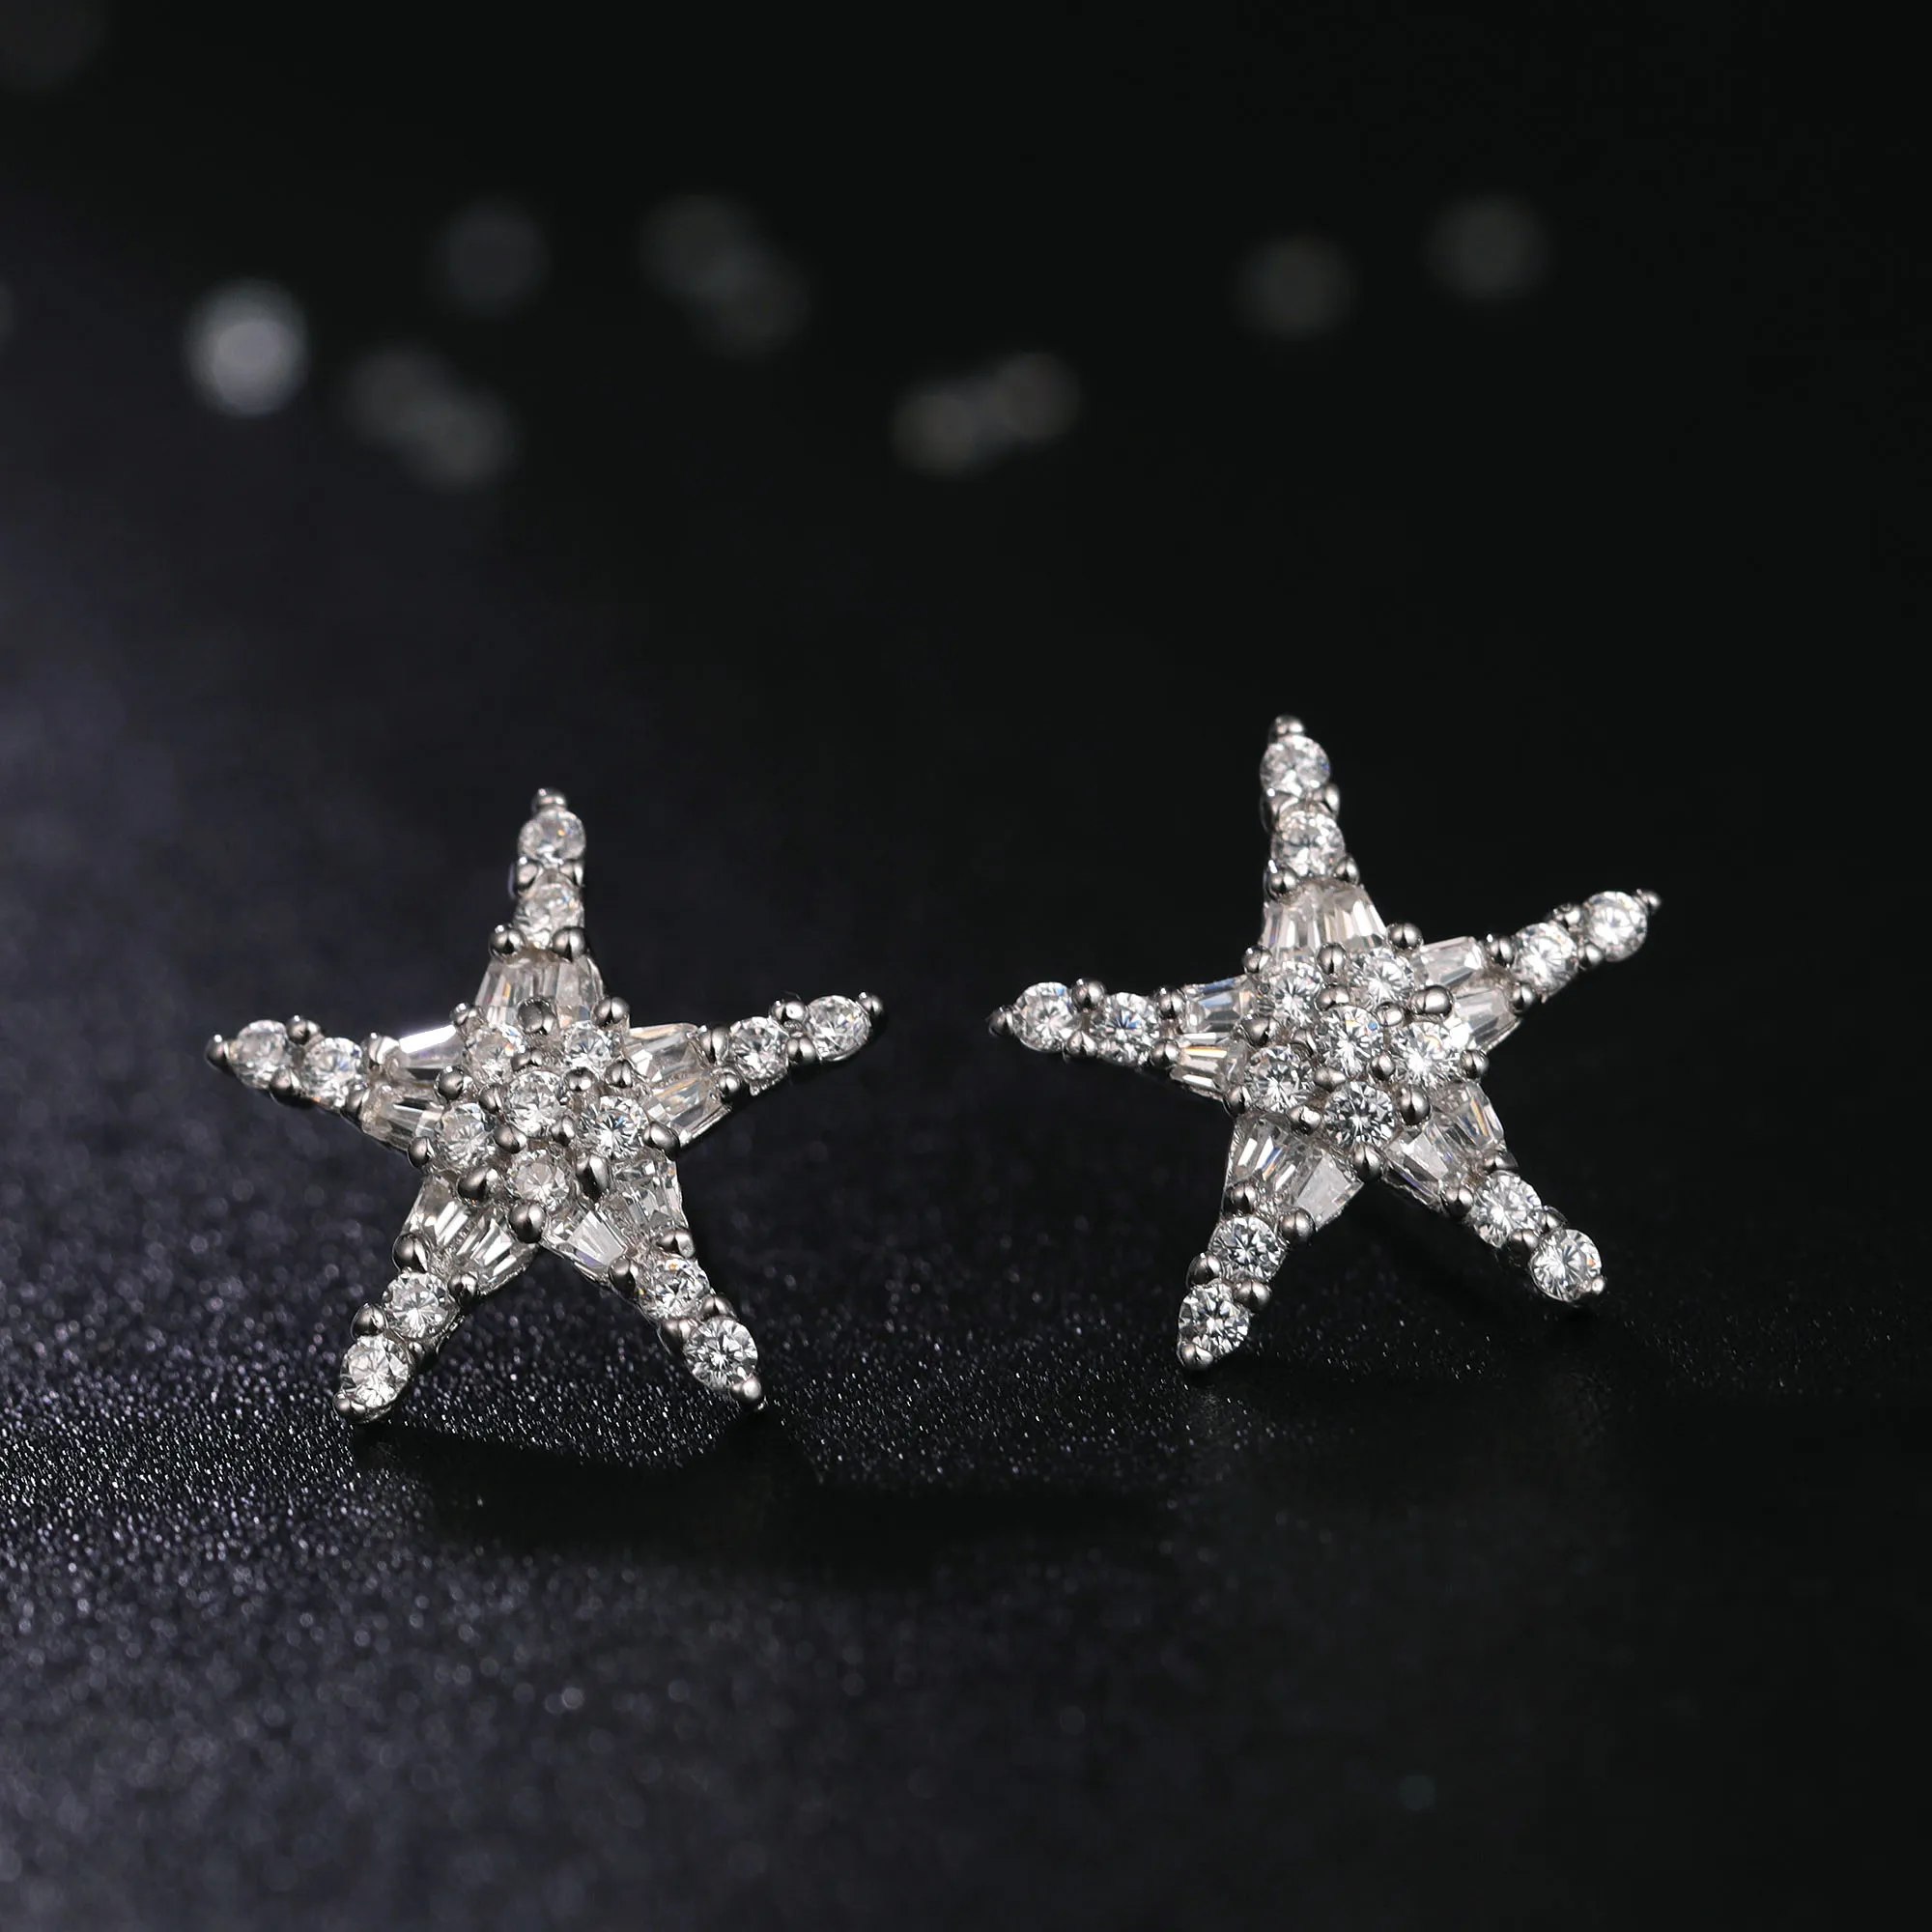 925 Sterling Silver Lovely Gothic Antique Snowflake Star Rhinestone Ear Stud Earrings for woman girl boucles d